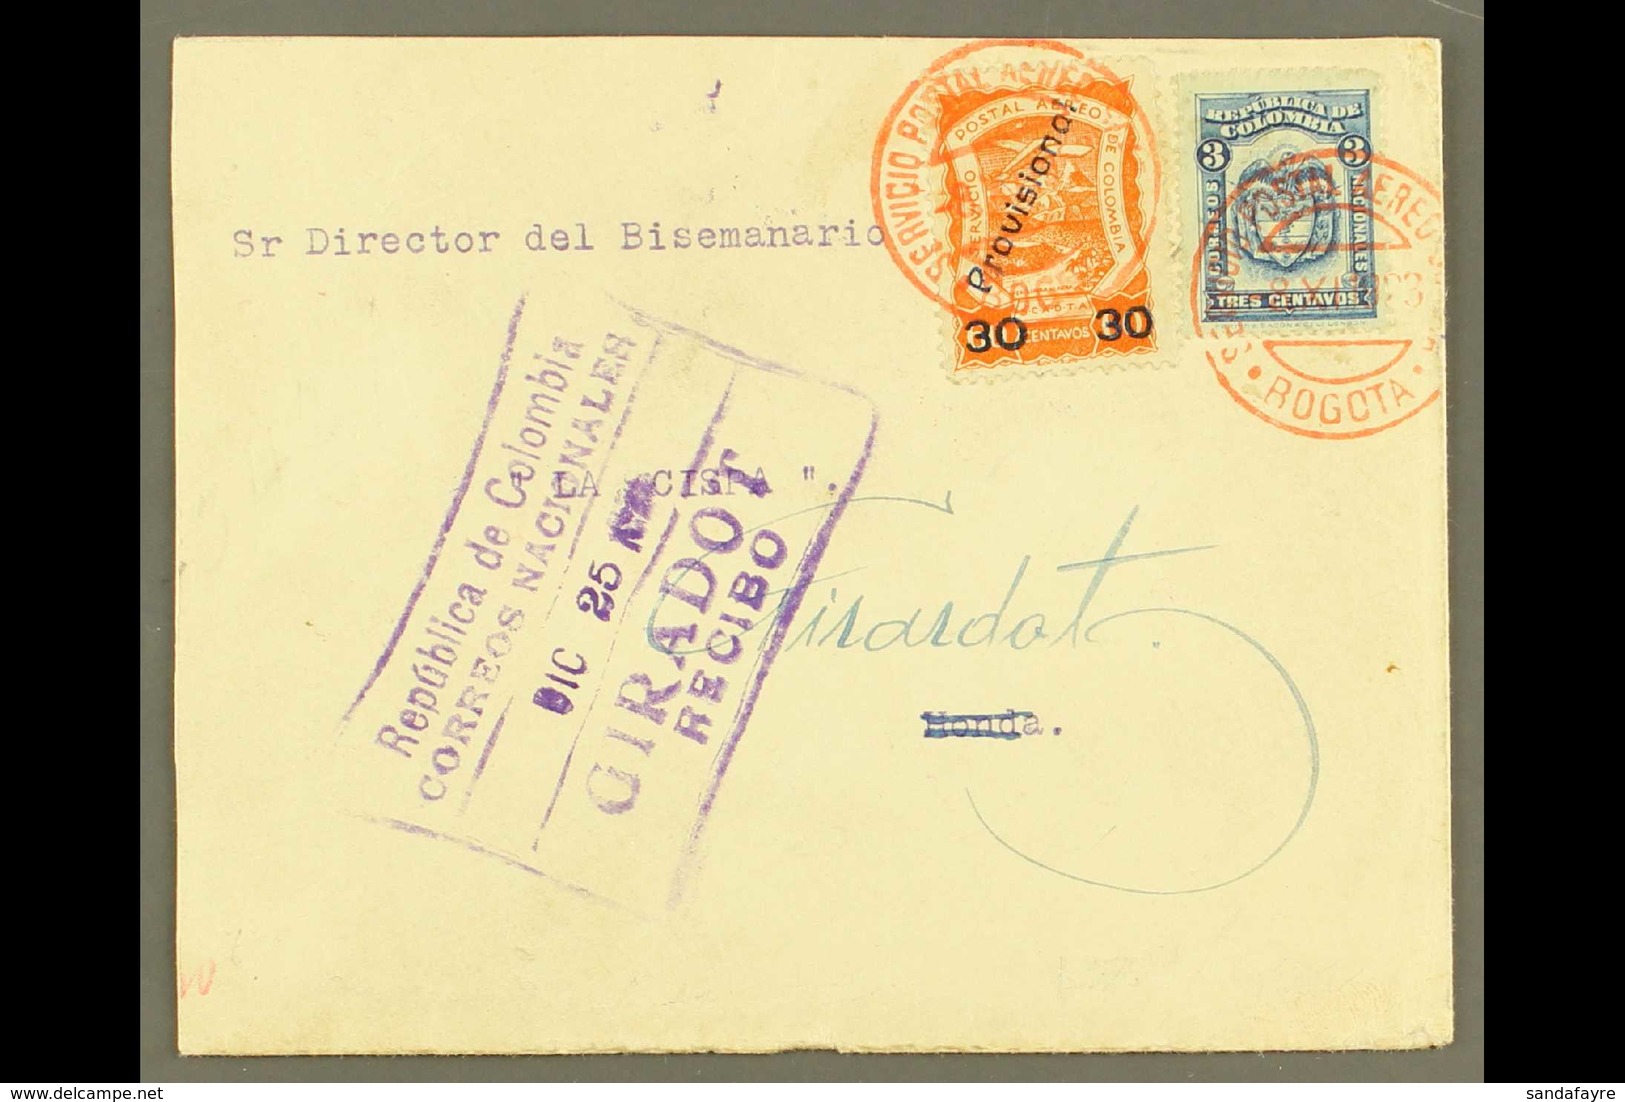 PRIVATE AIR COMPANIES - SCADTA 1923 (Nov/Dec) Cover From Bogota To Honda (reduced At Left) Bearing 1923 30c On 60c Orang - Colombia